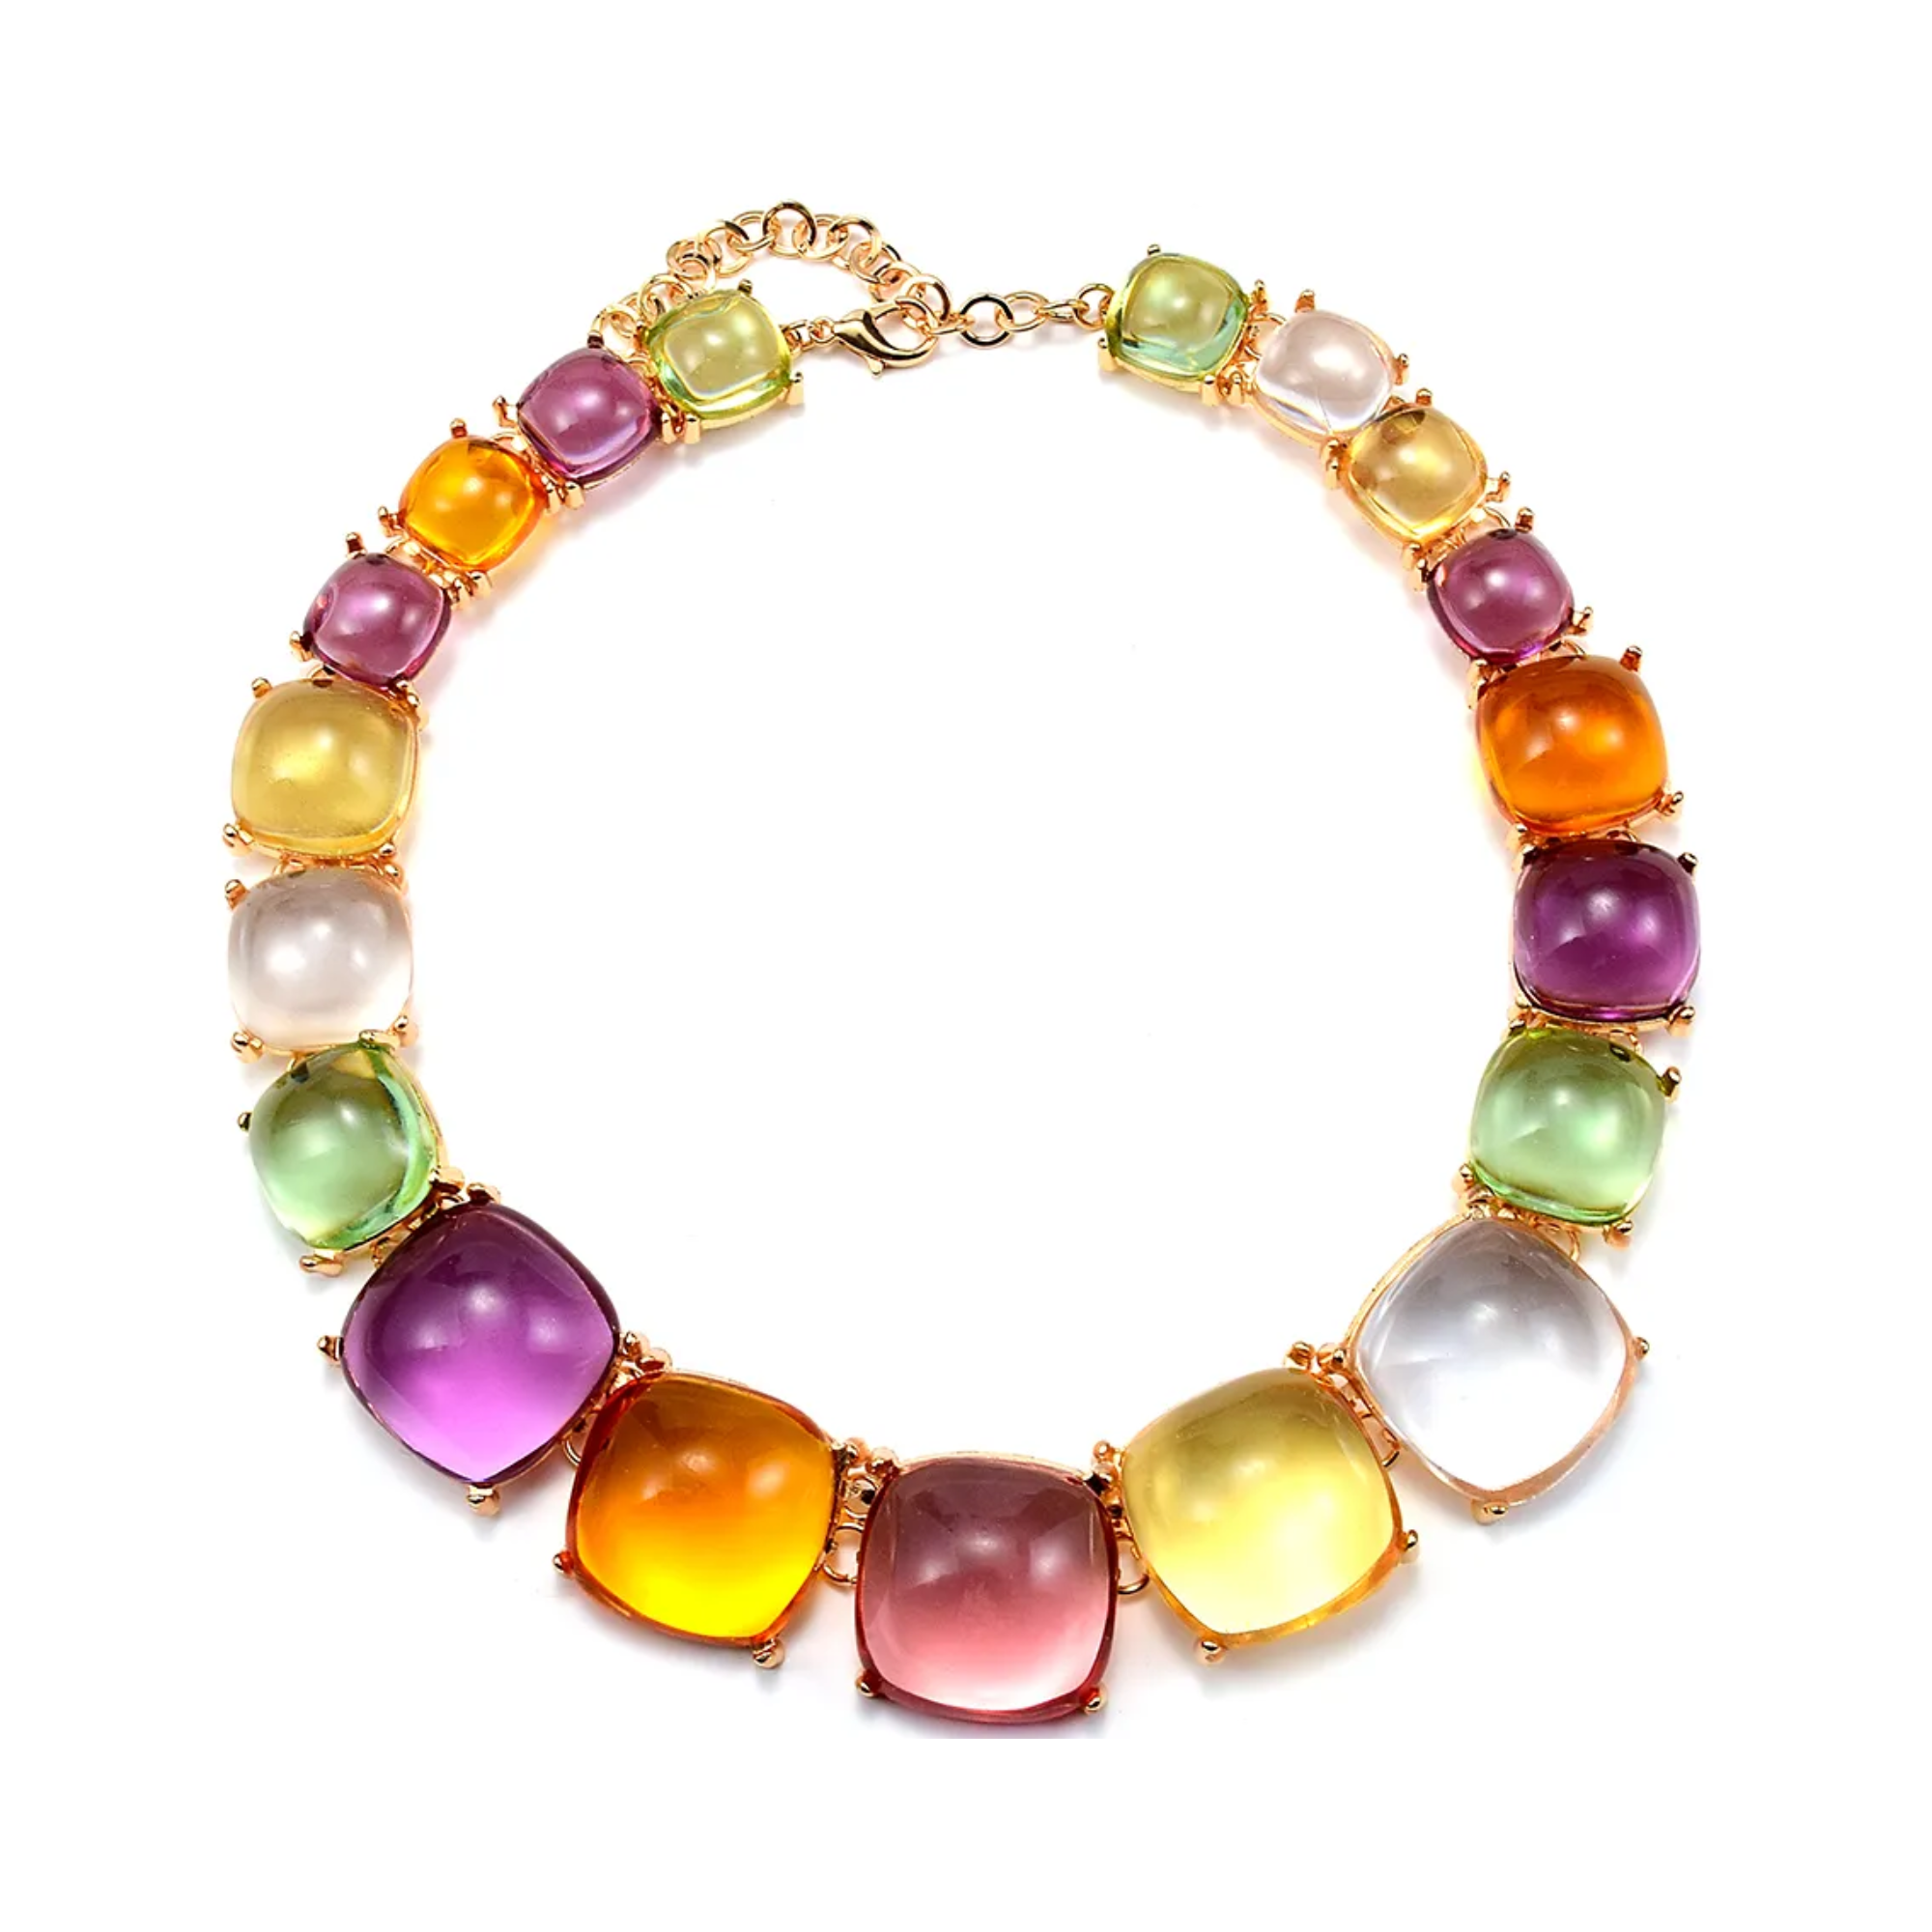 Smooth Resin Choker Necklace - Pre Order: Ships Feb 29